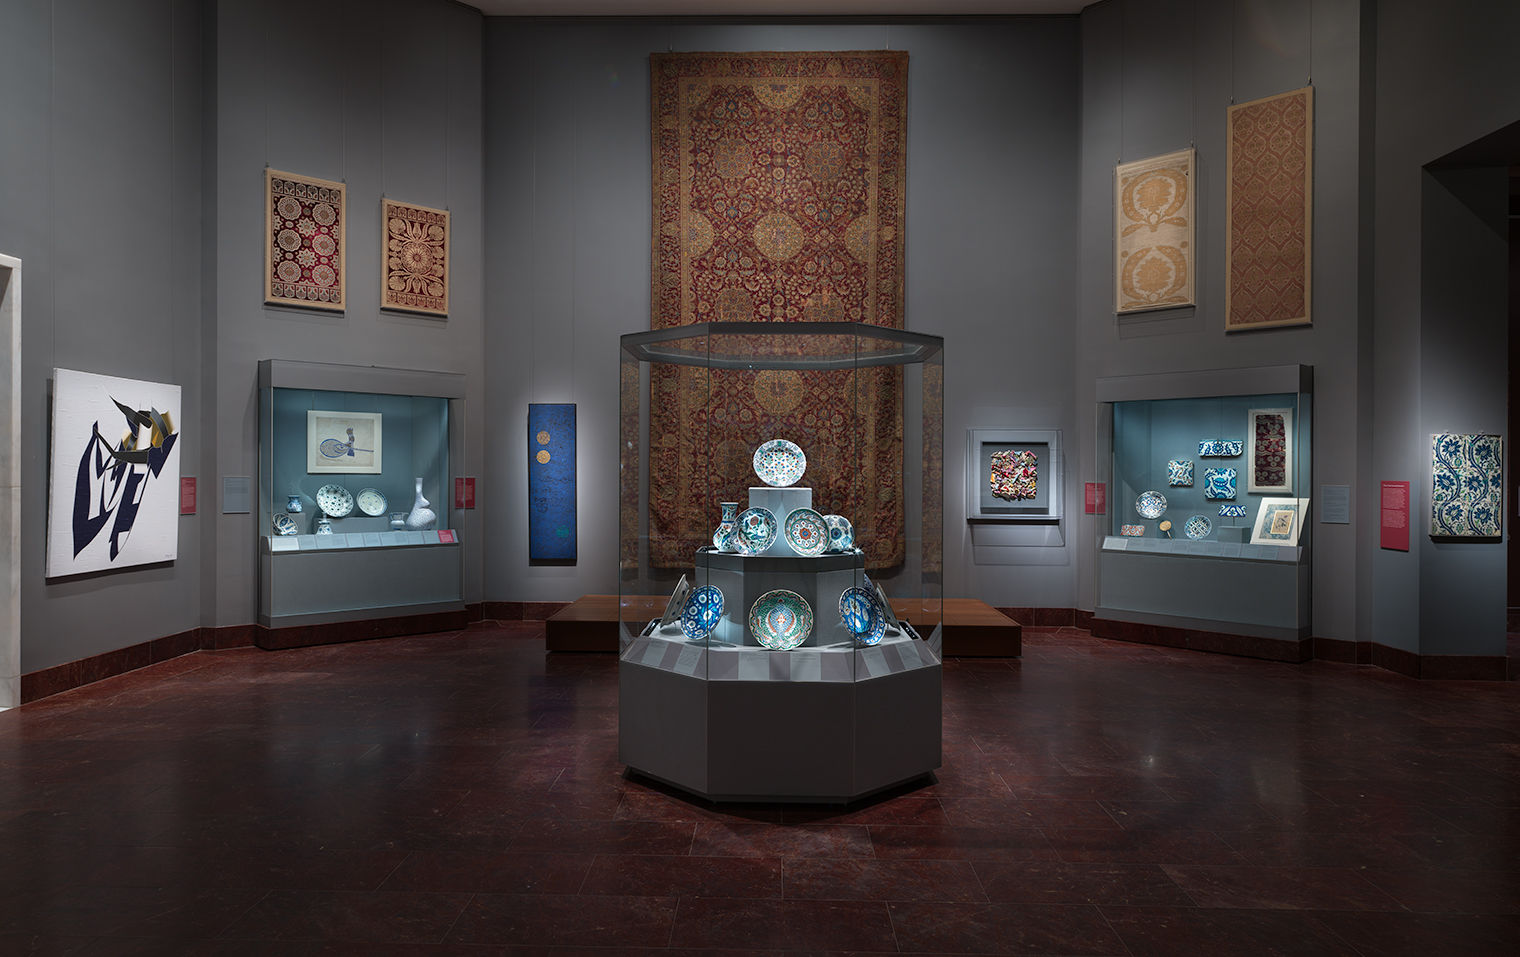 Gallery view of the installation, Dialogues: Modern Artists and the Ottoman Past, in the Koç Family Galleries - Carpets, Textiles and the Greater Ottoman World and Arts of the Ottoman Court (14th–20th centuries) depicting a central glass case with Ottoman ceramics in the foreground, and wall cases, carpets and textiles, and modern artworks on the walls in the background